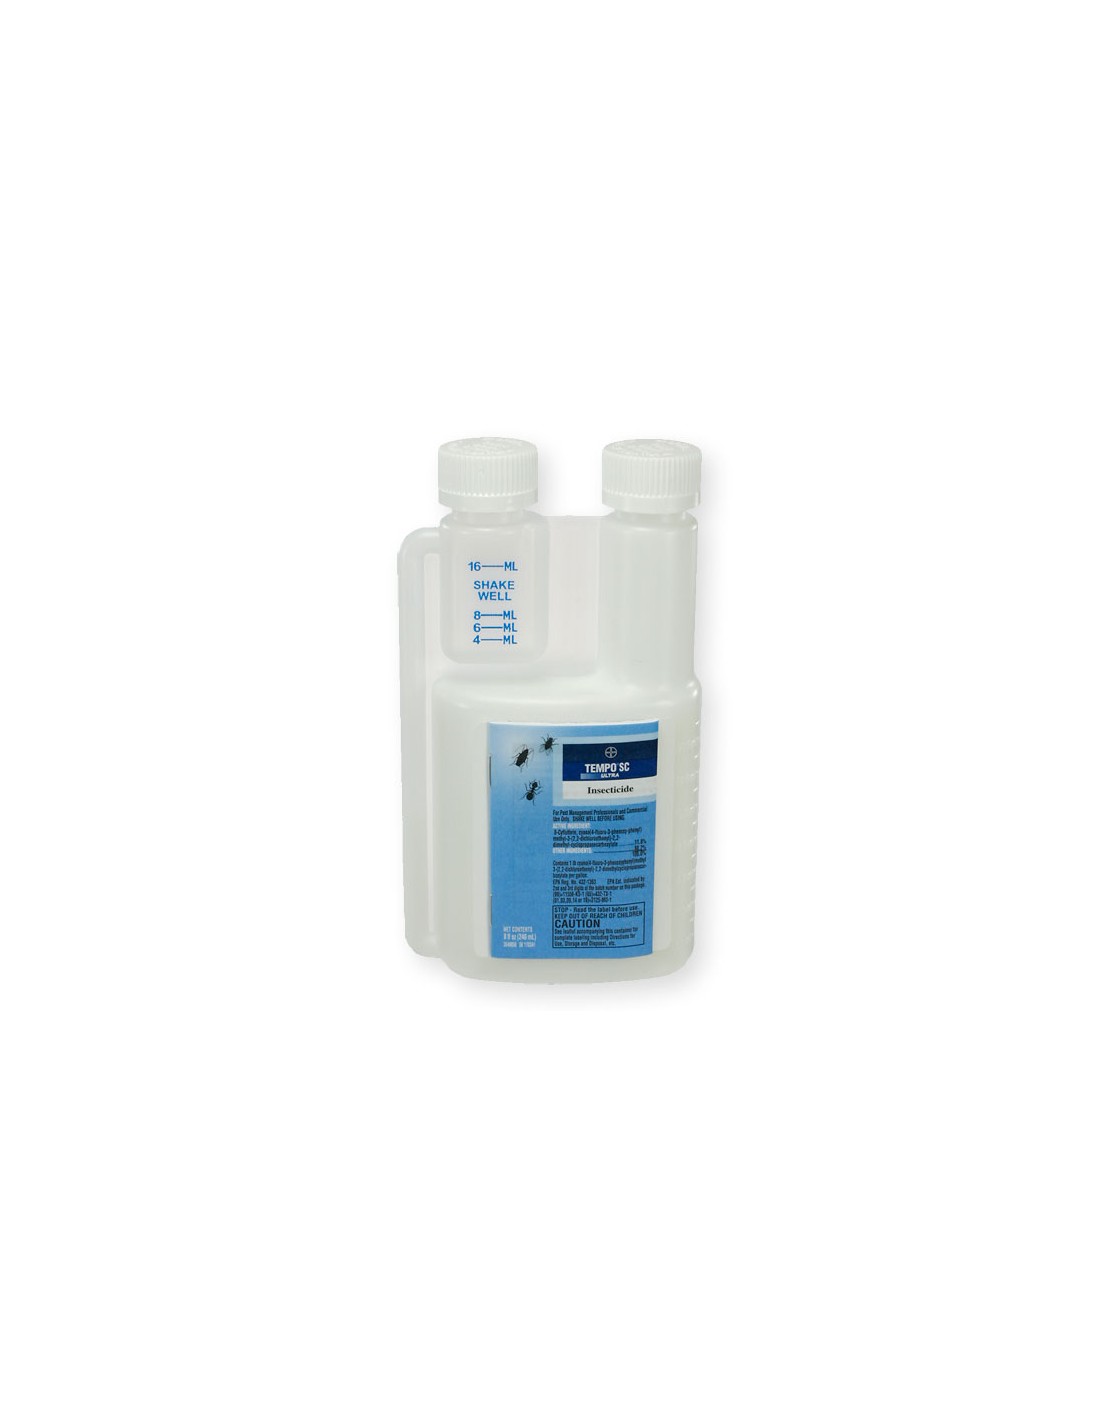 What is the difference between tempo sc ultra insecticide and tempo? What's the best product for bed bugs?